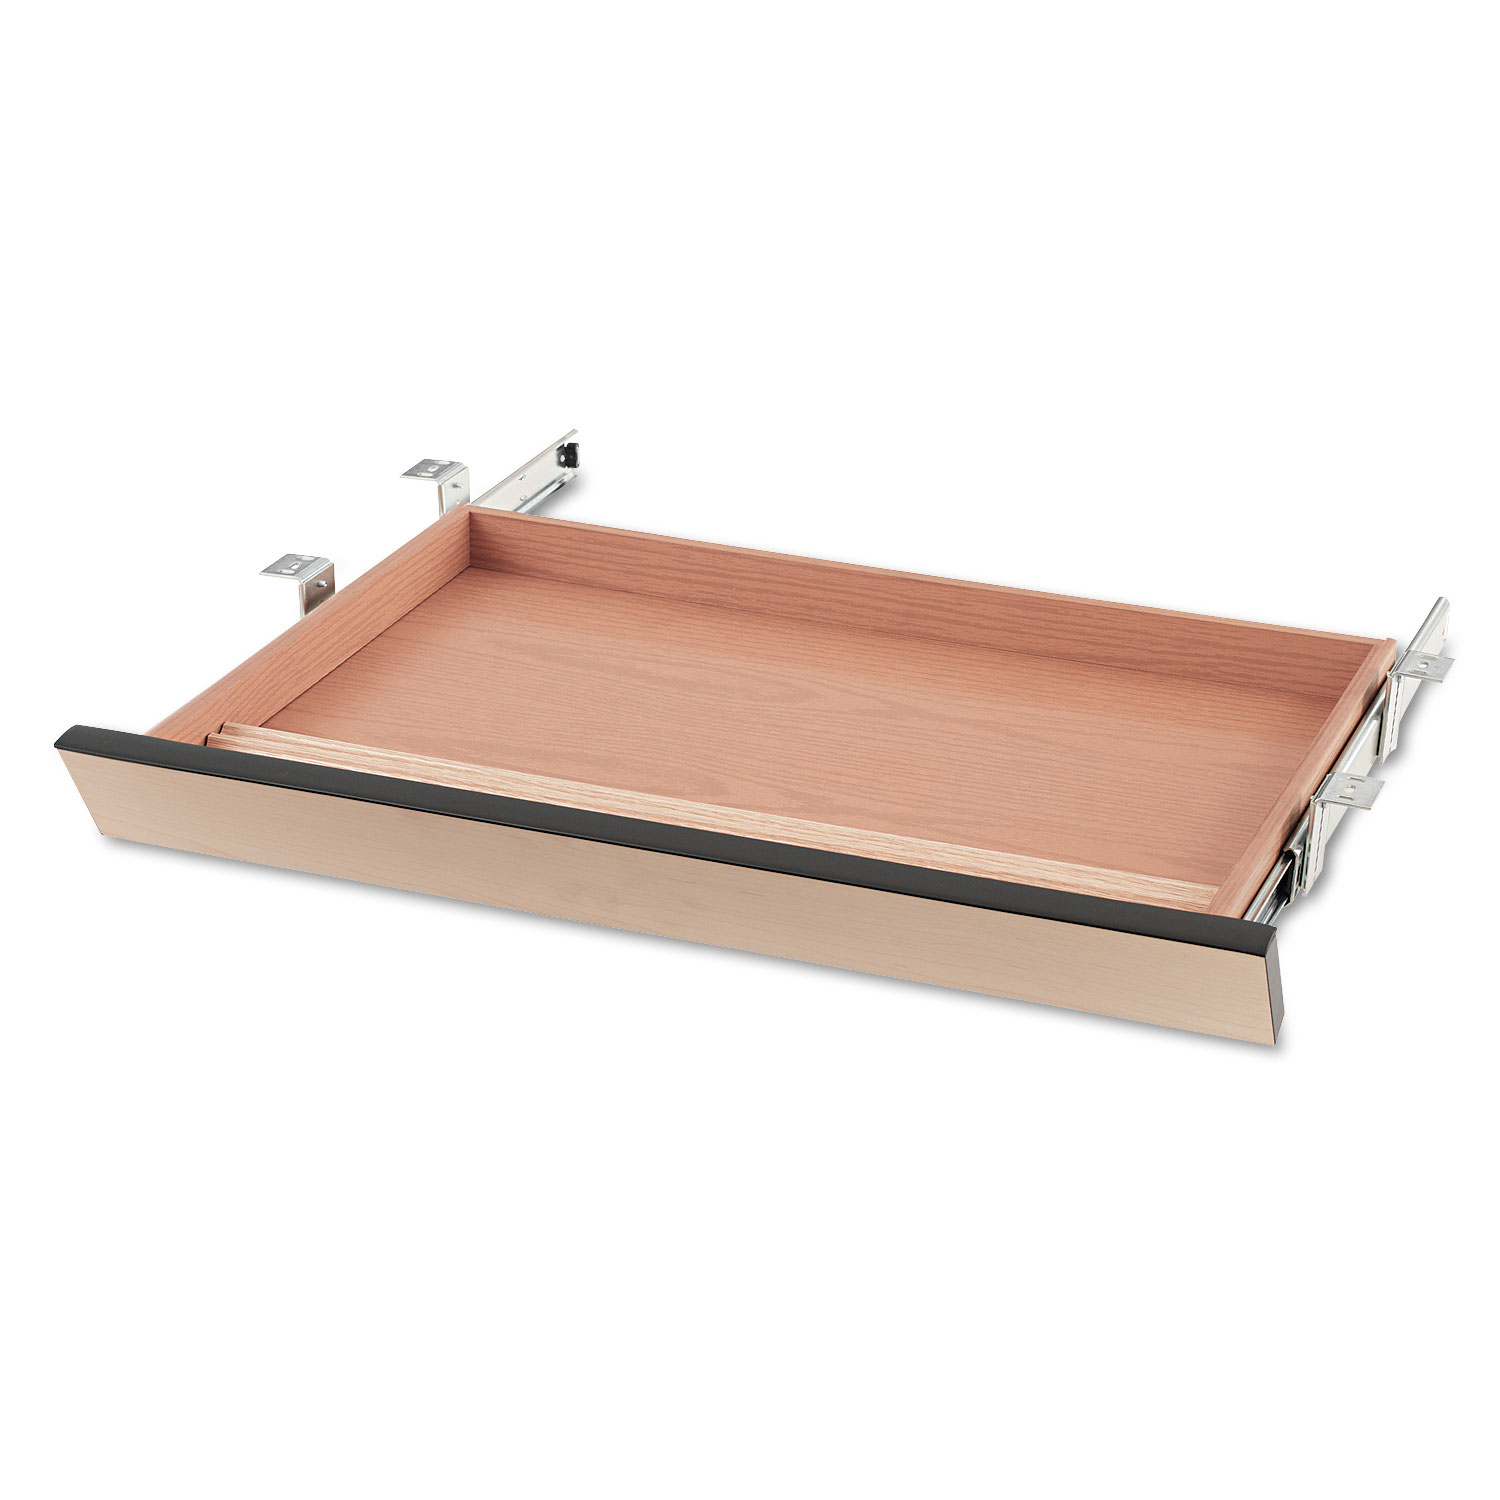 Laminate Angled Center Drawer, 26w x 15 3/8d x 2 1/2h, Natural Maple